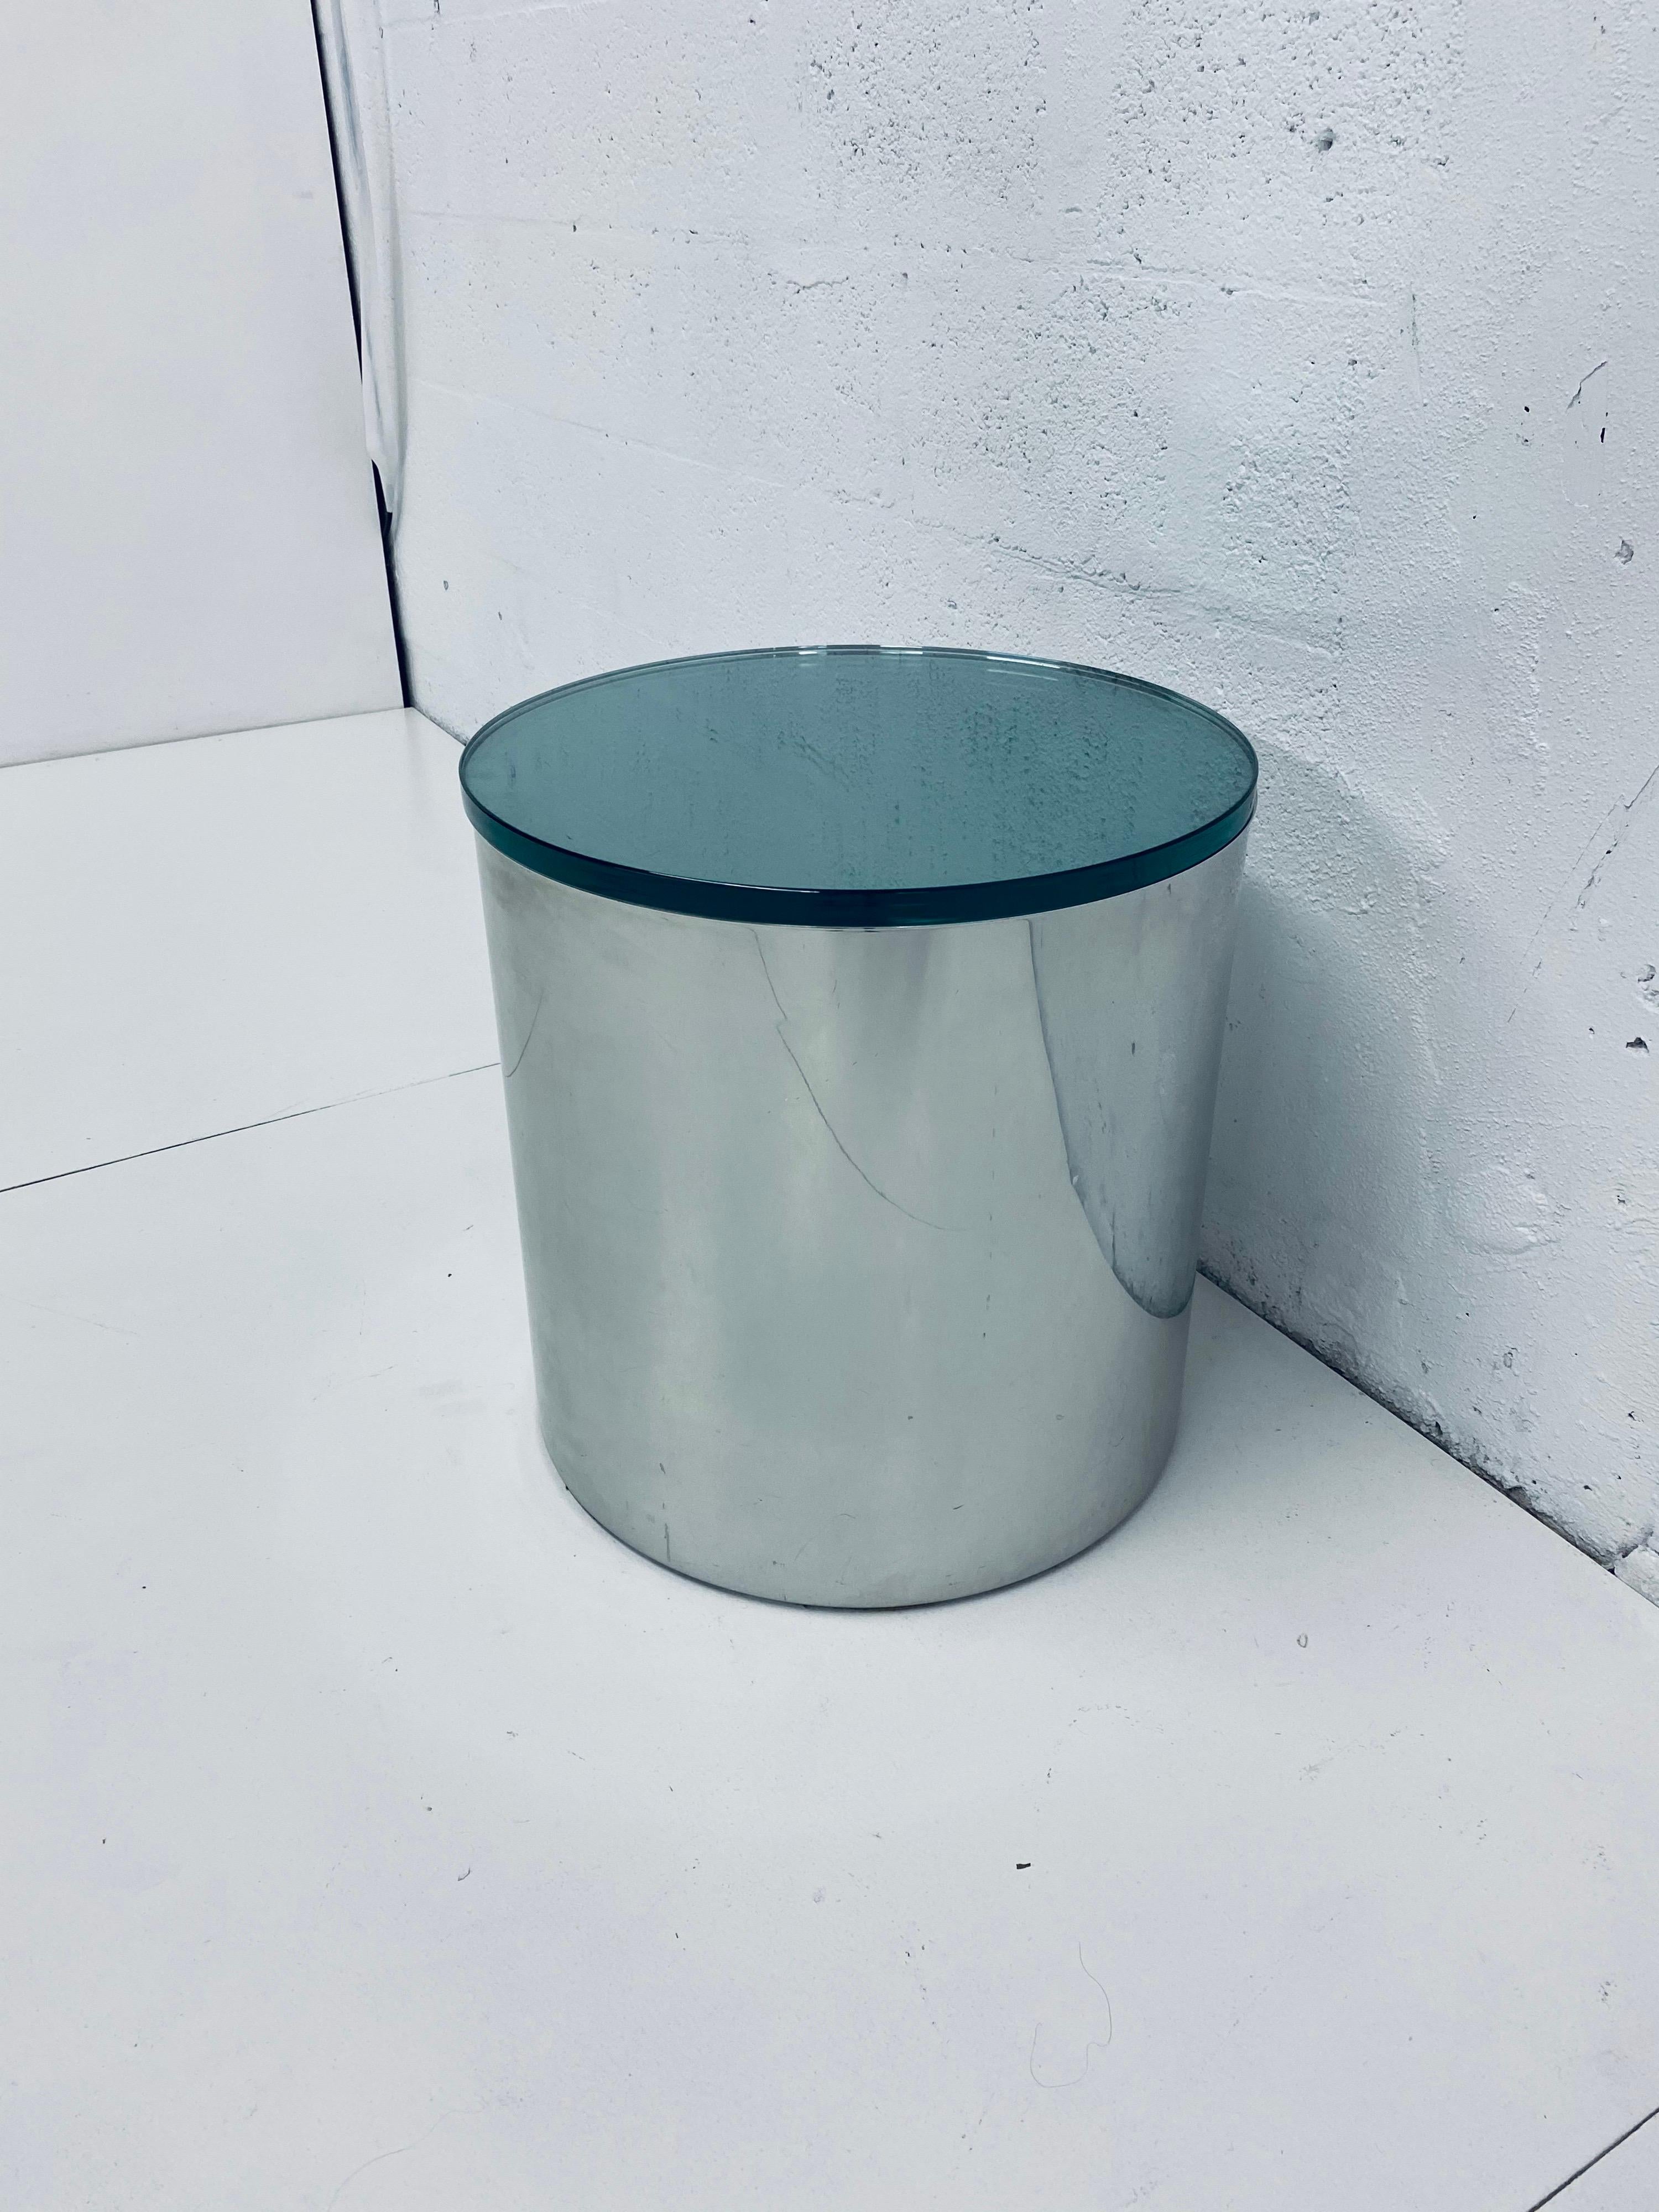 American Paul Mayen Polished Steel and Glass Side Table for Habitat, 1970s For Sale